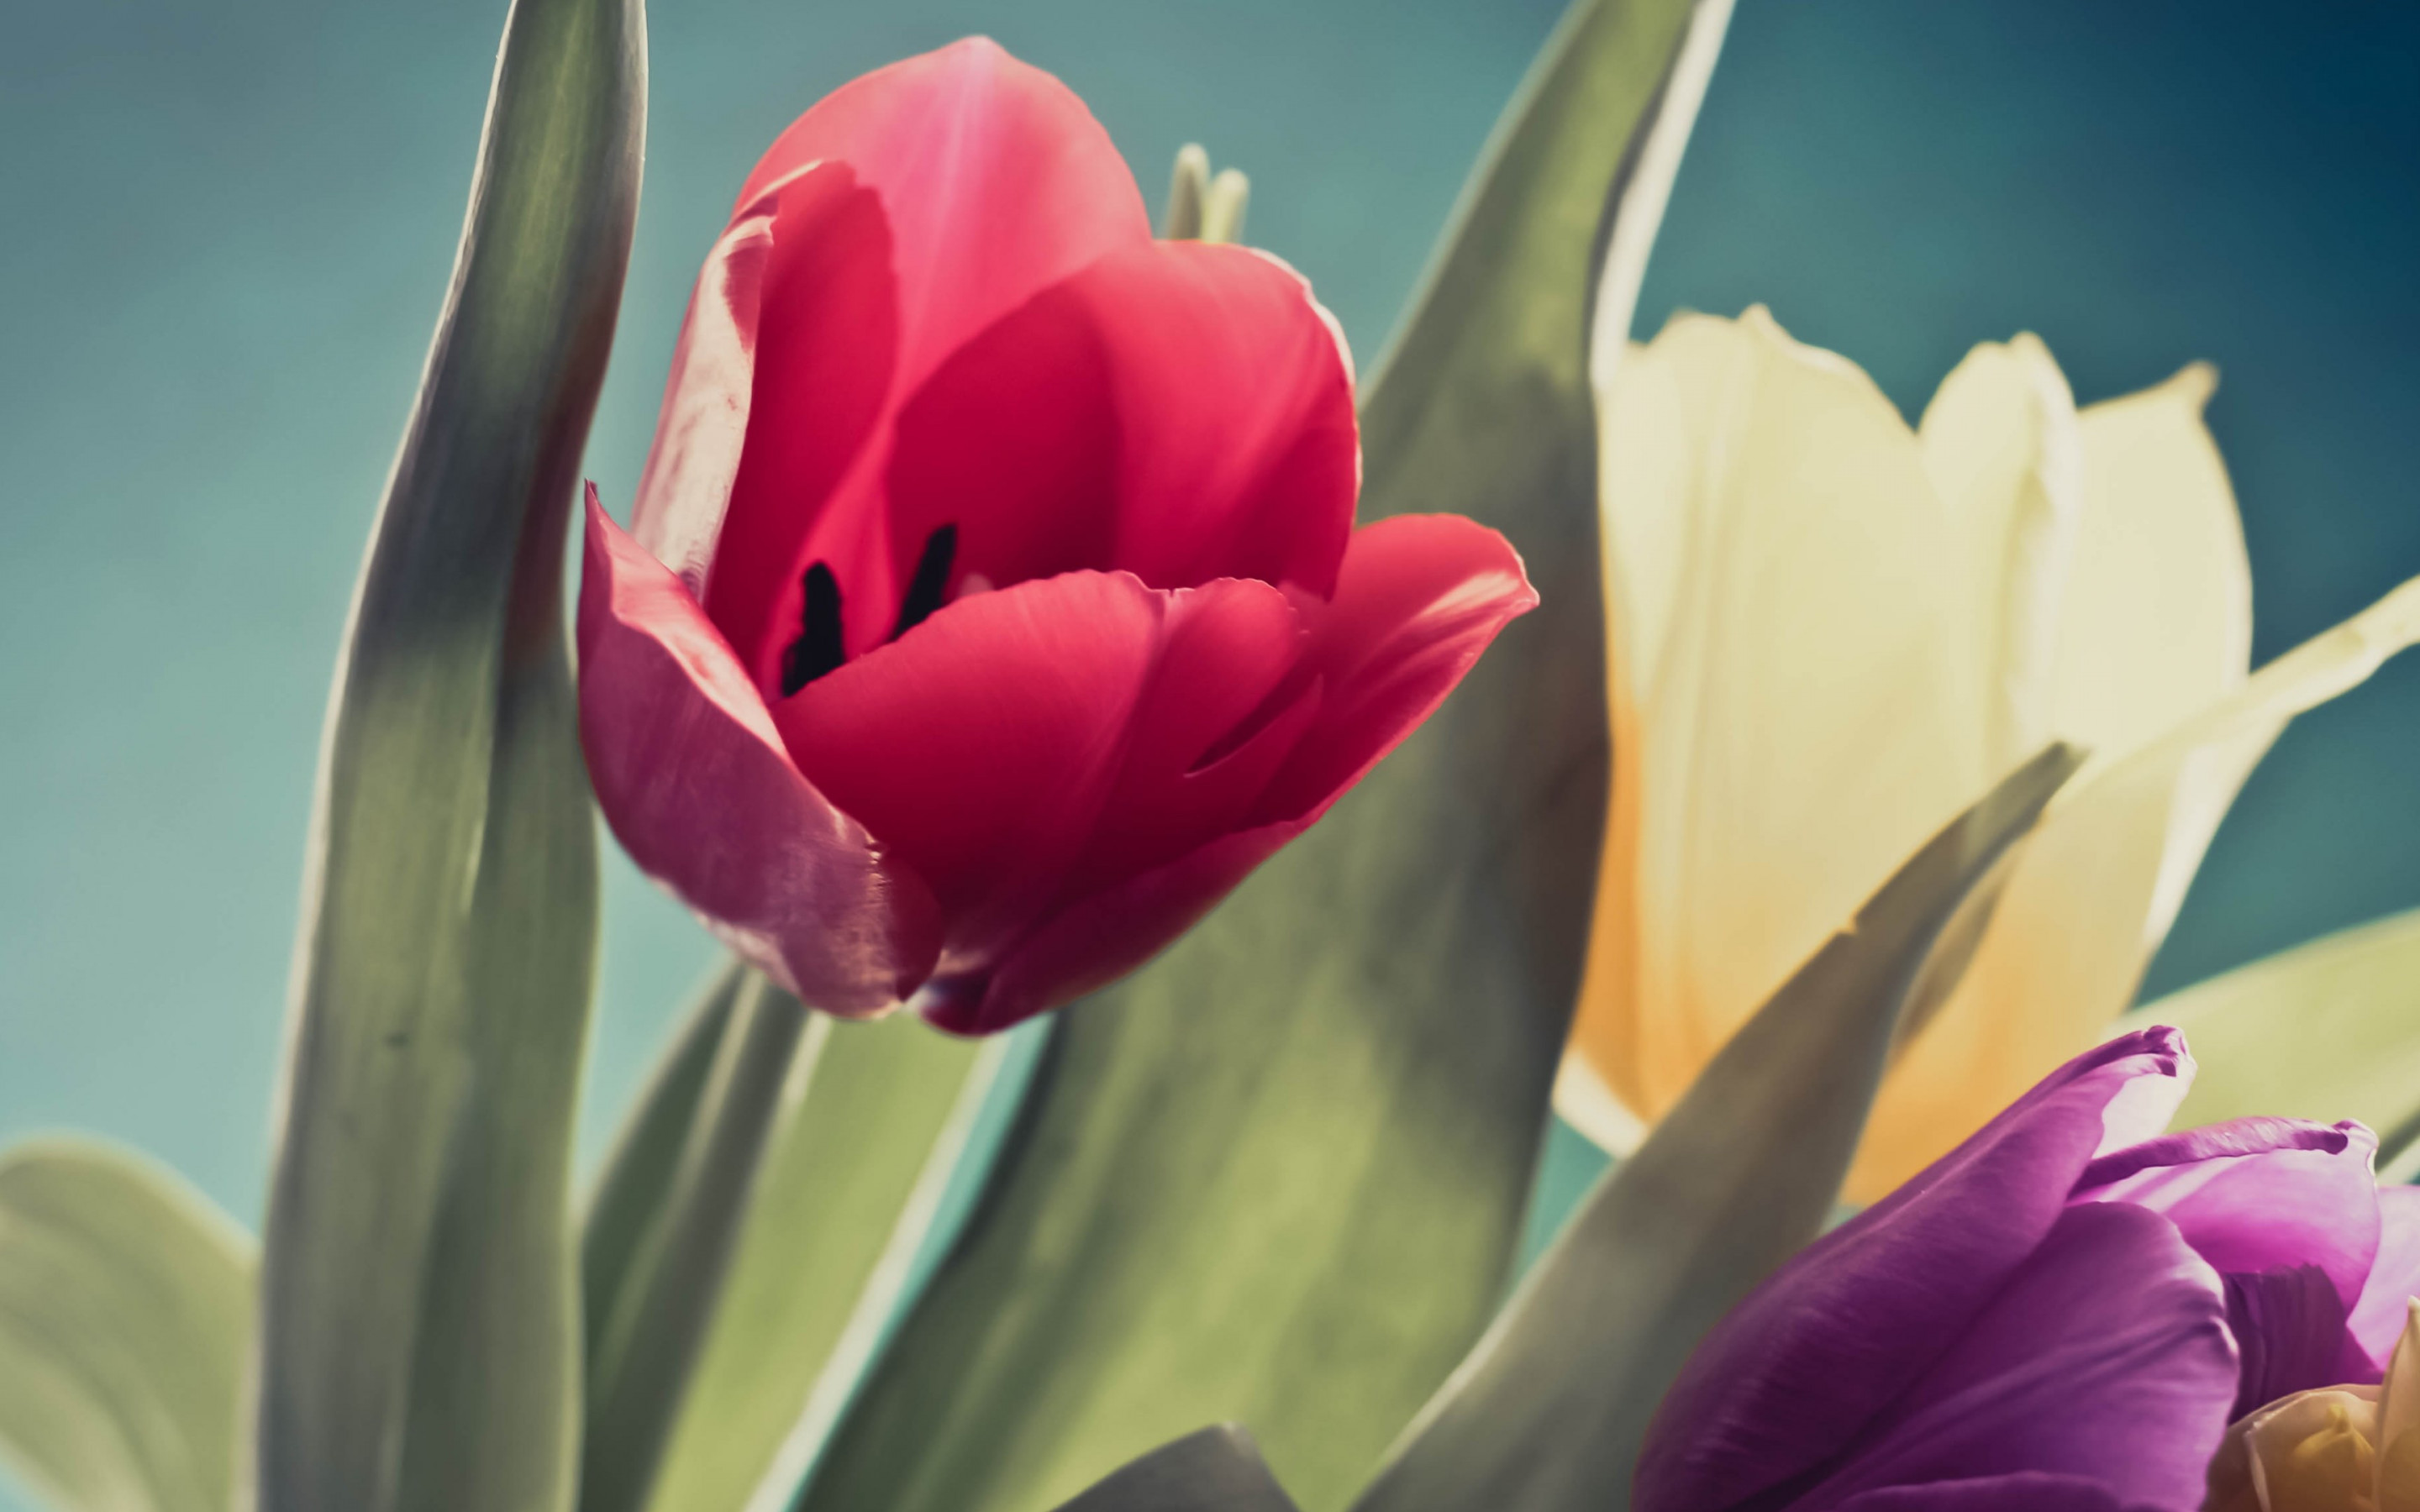 Red, purple and yellow tulips wallpaper 2880x1800